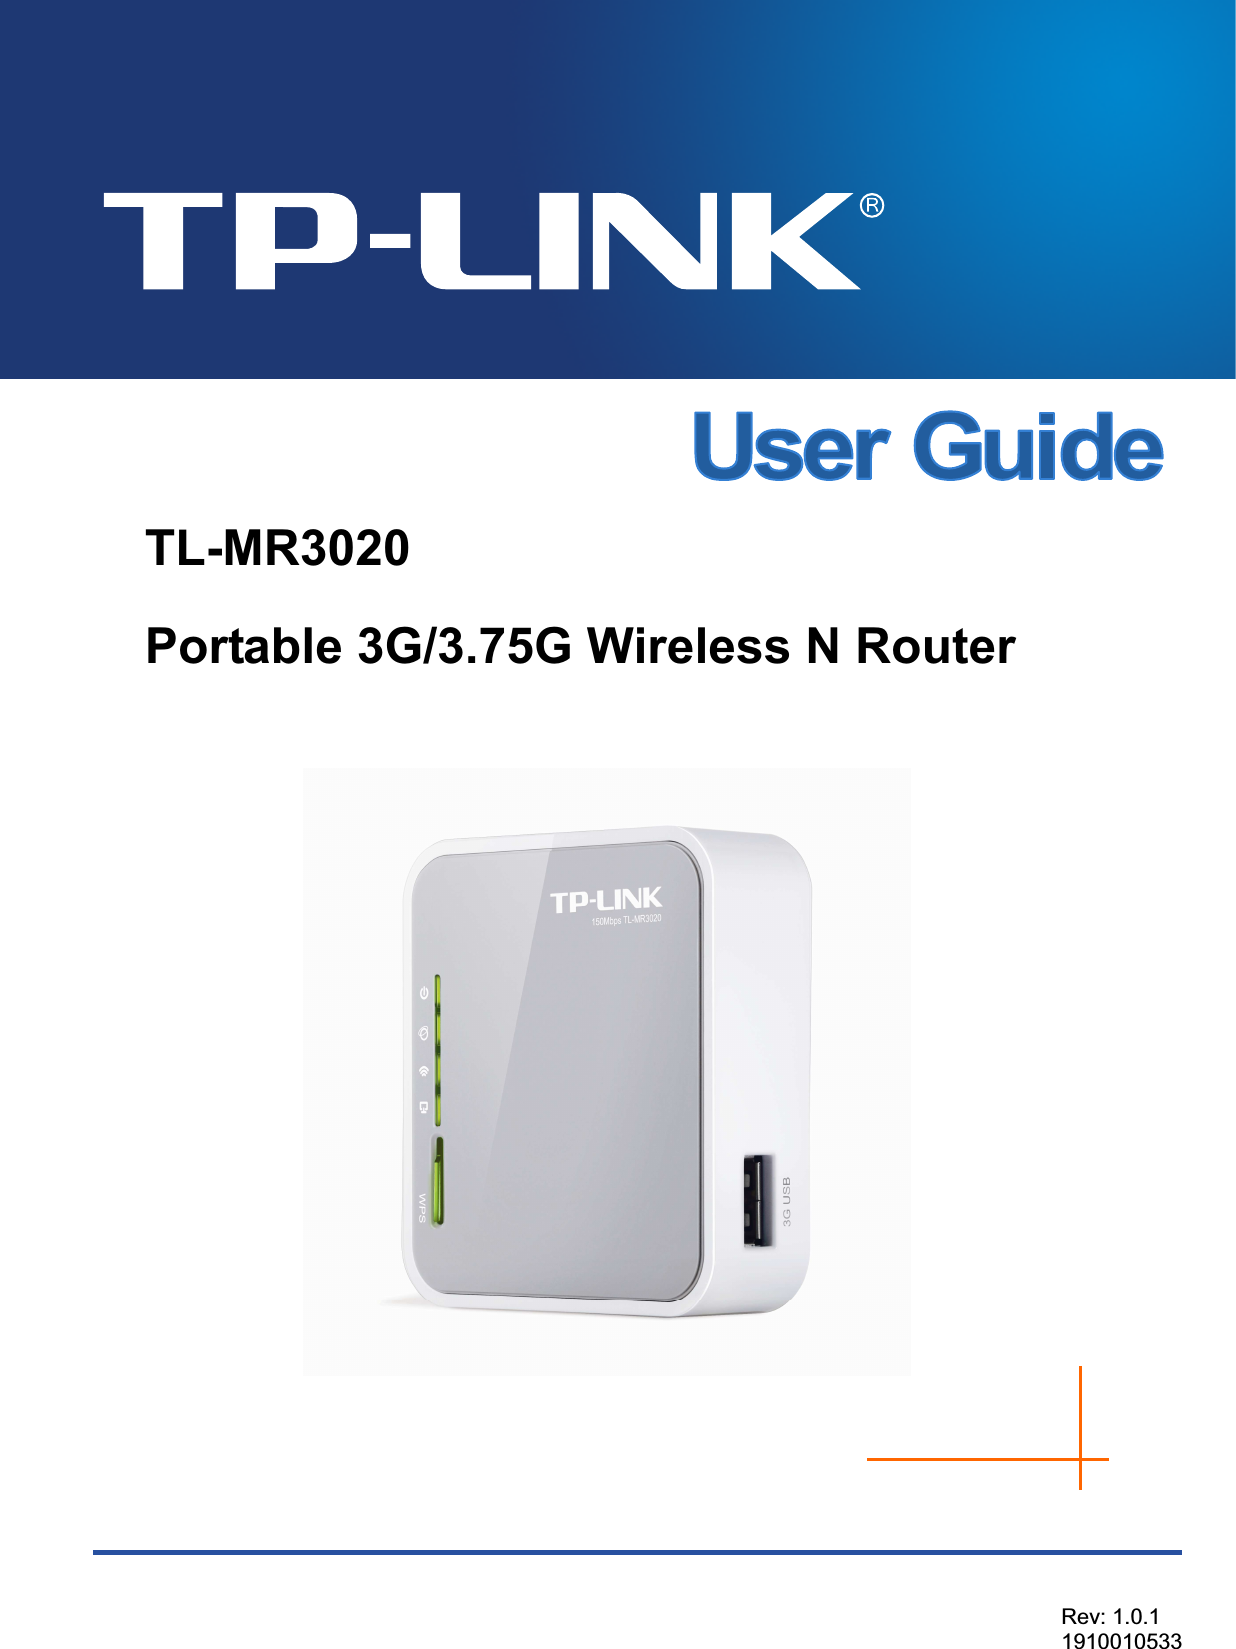 TL-MR3020Portable 3G/3.75G Wireless N Router Rev: 1.0.11910010533 